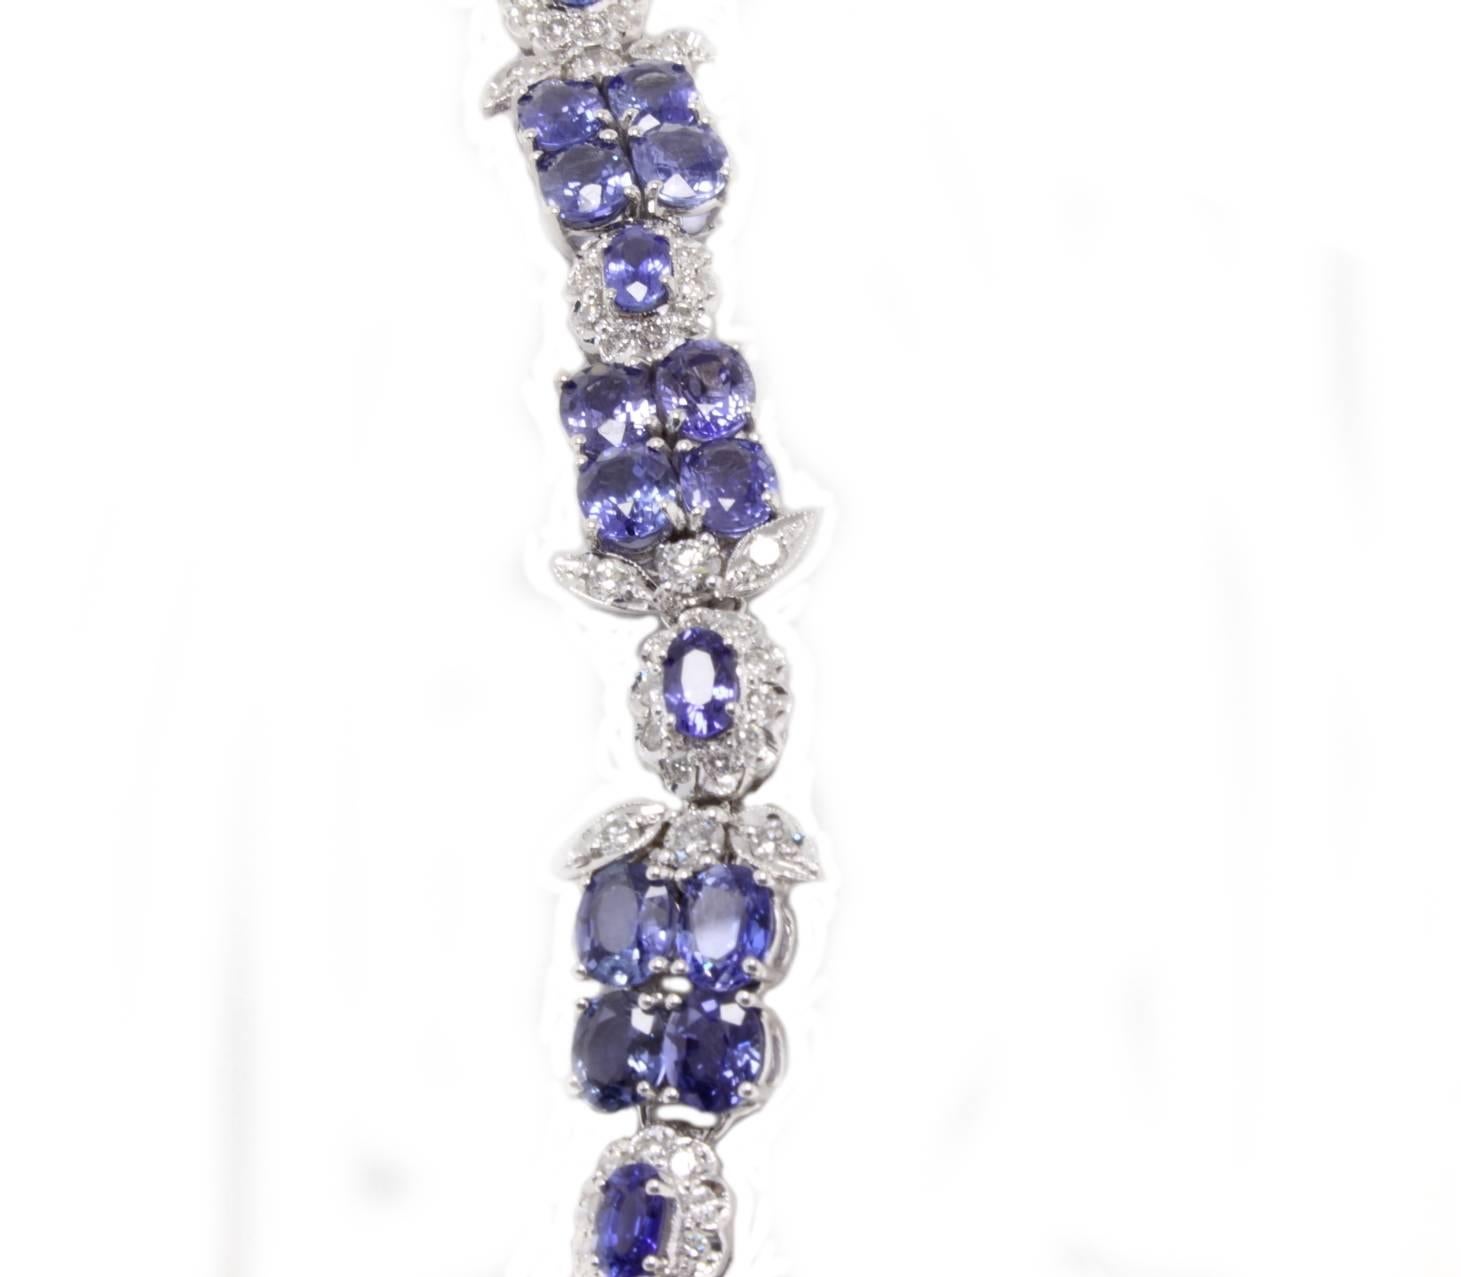 Sparkling link bracelet in 14K white gold mounted with 2.94 ct of white diamonds and with 28.38 ct of blue sapphires, composing a charming design.
Diamonds 2.94 ct
Blue Sapphires 28.38 ct
Tot weight 24.50 g
R.F + ggree

For any inquiries, please